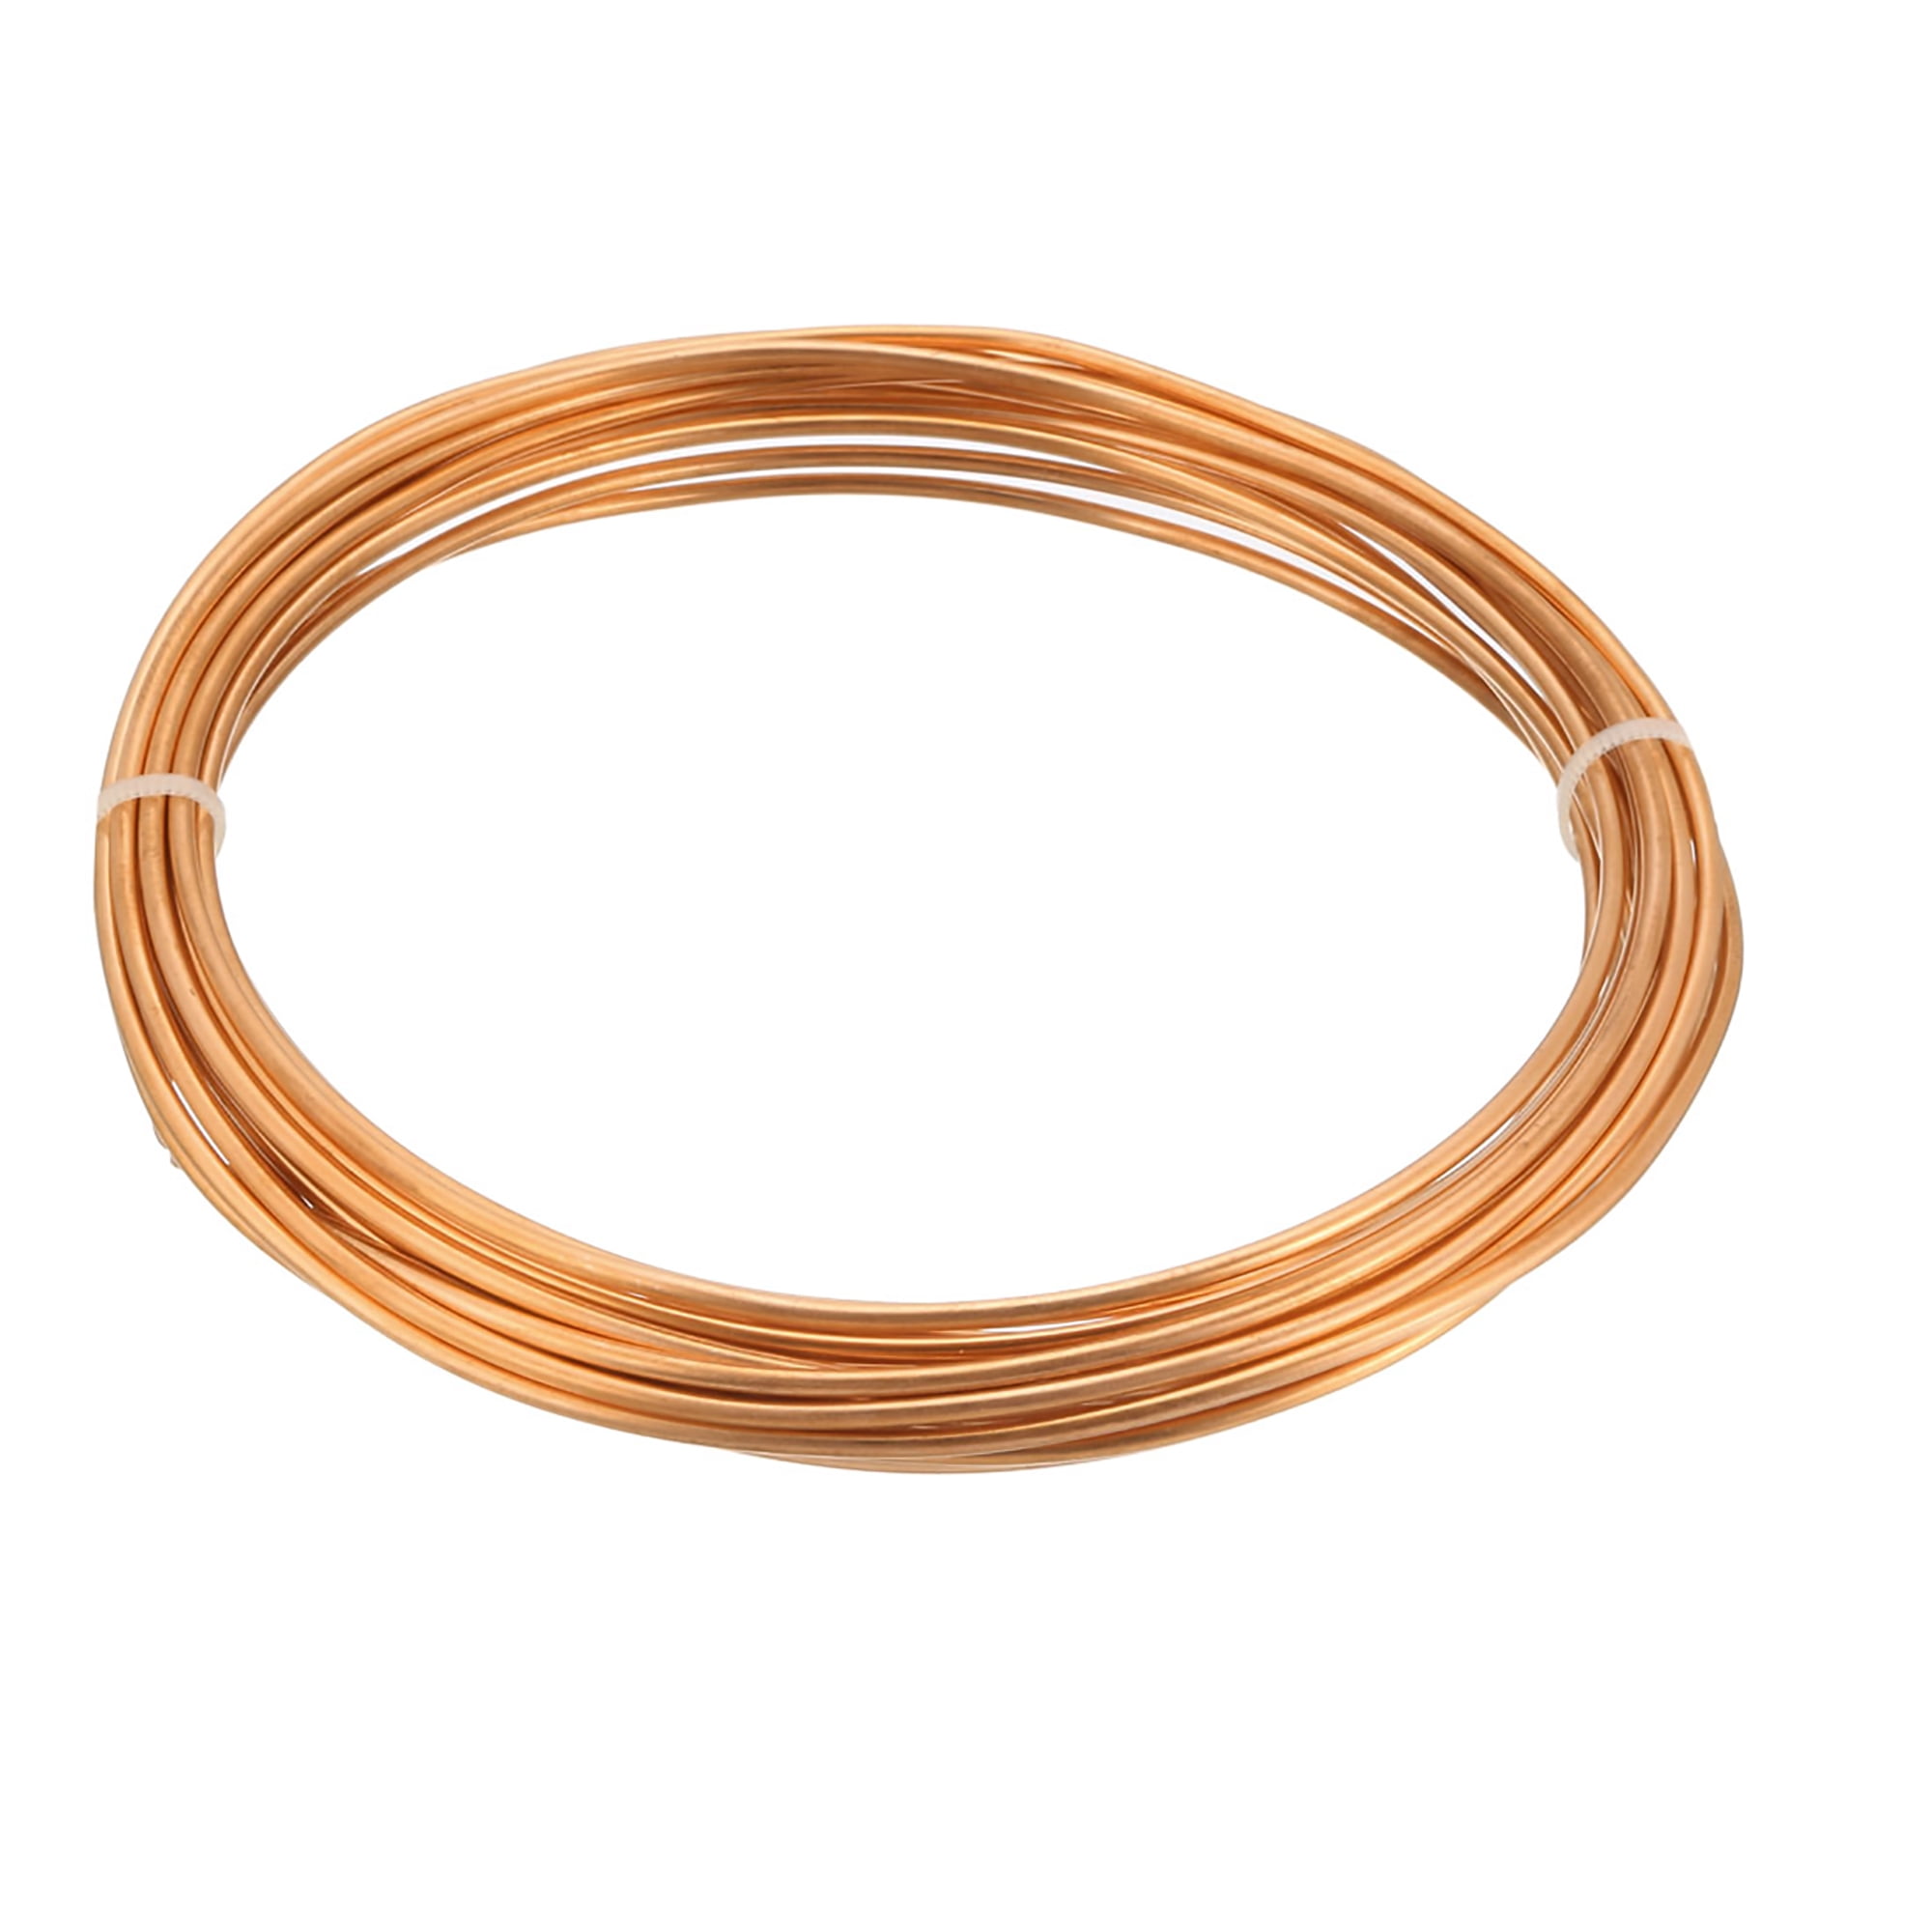 2M 0.5mm Soft Microbore Copper Pipe OD 2mm & ID 1mm For Refrigeration Plumbing 